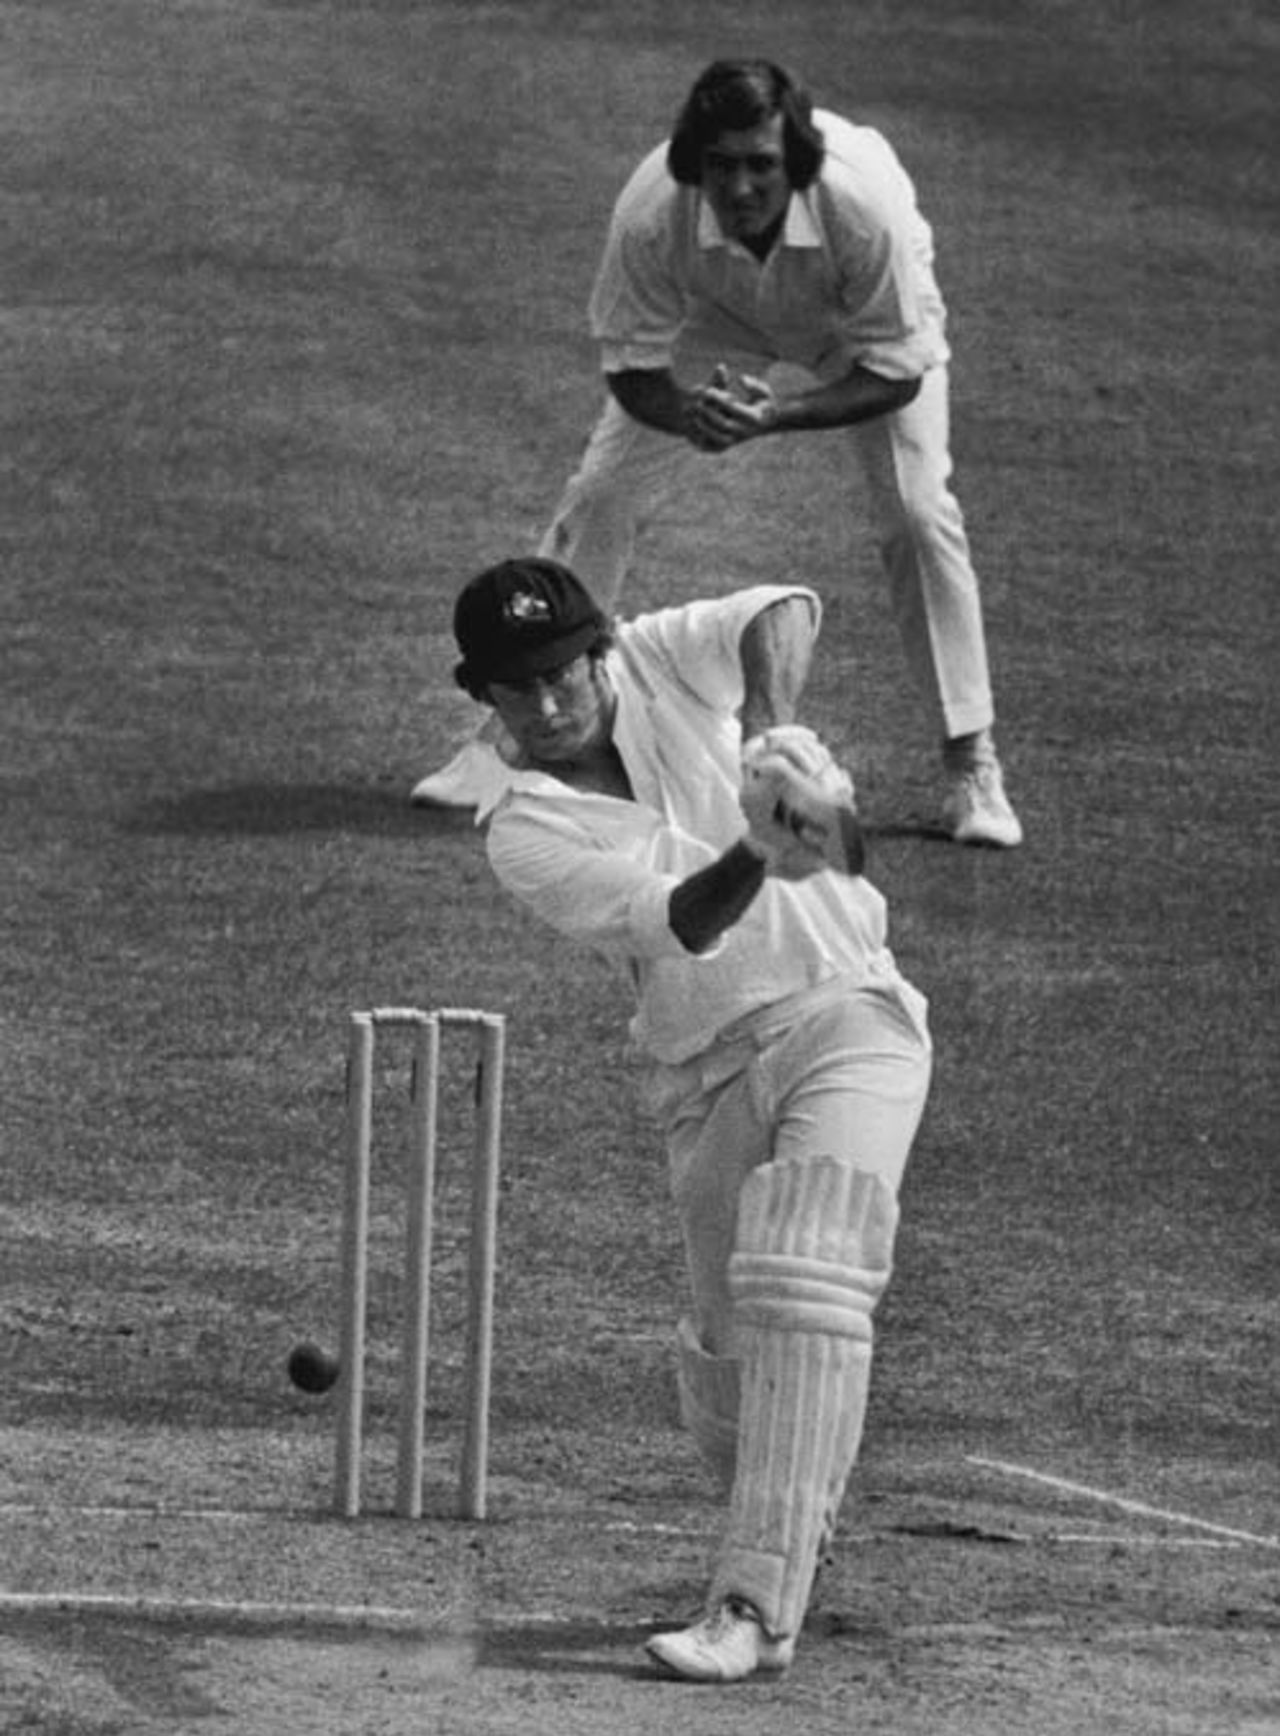 Ian Chappell  in action, England v Australia, Lord's, 2nd Test, August 5, 1975 